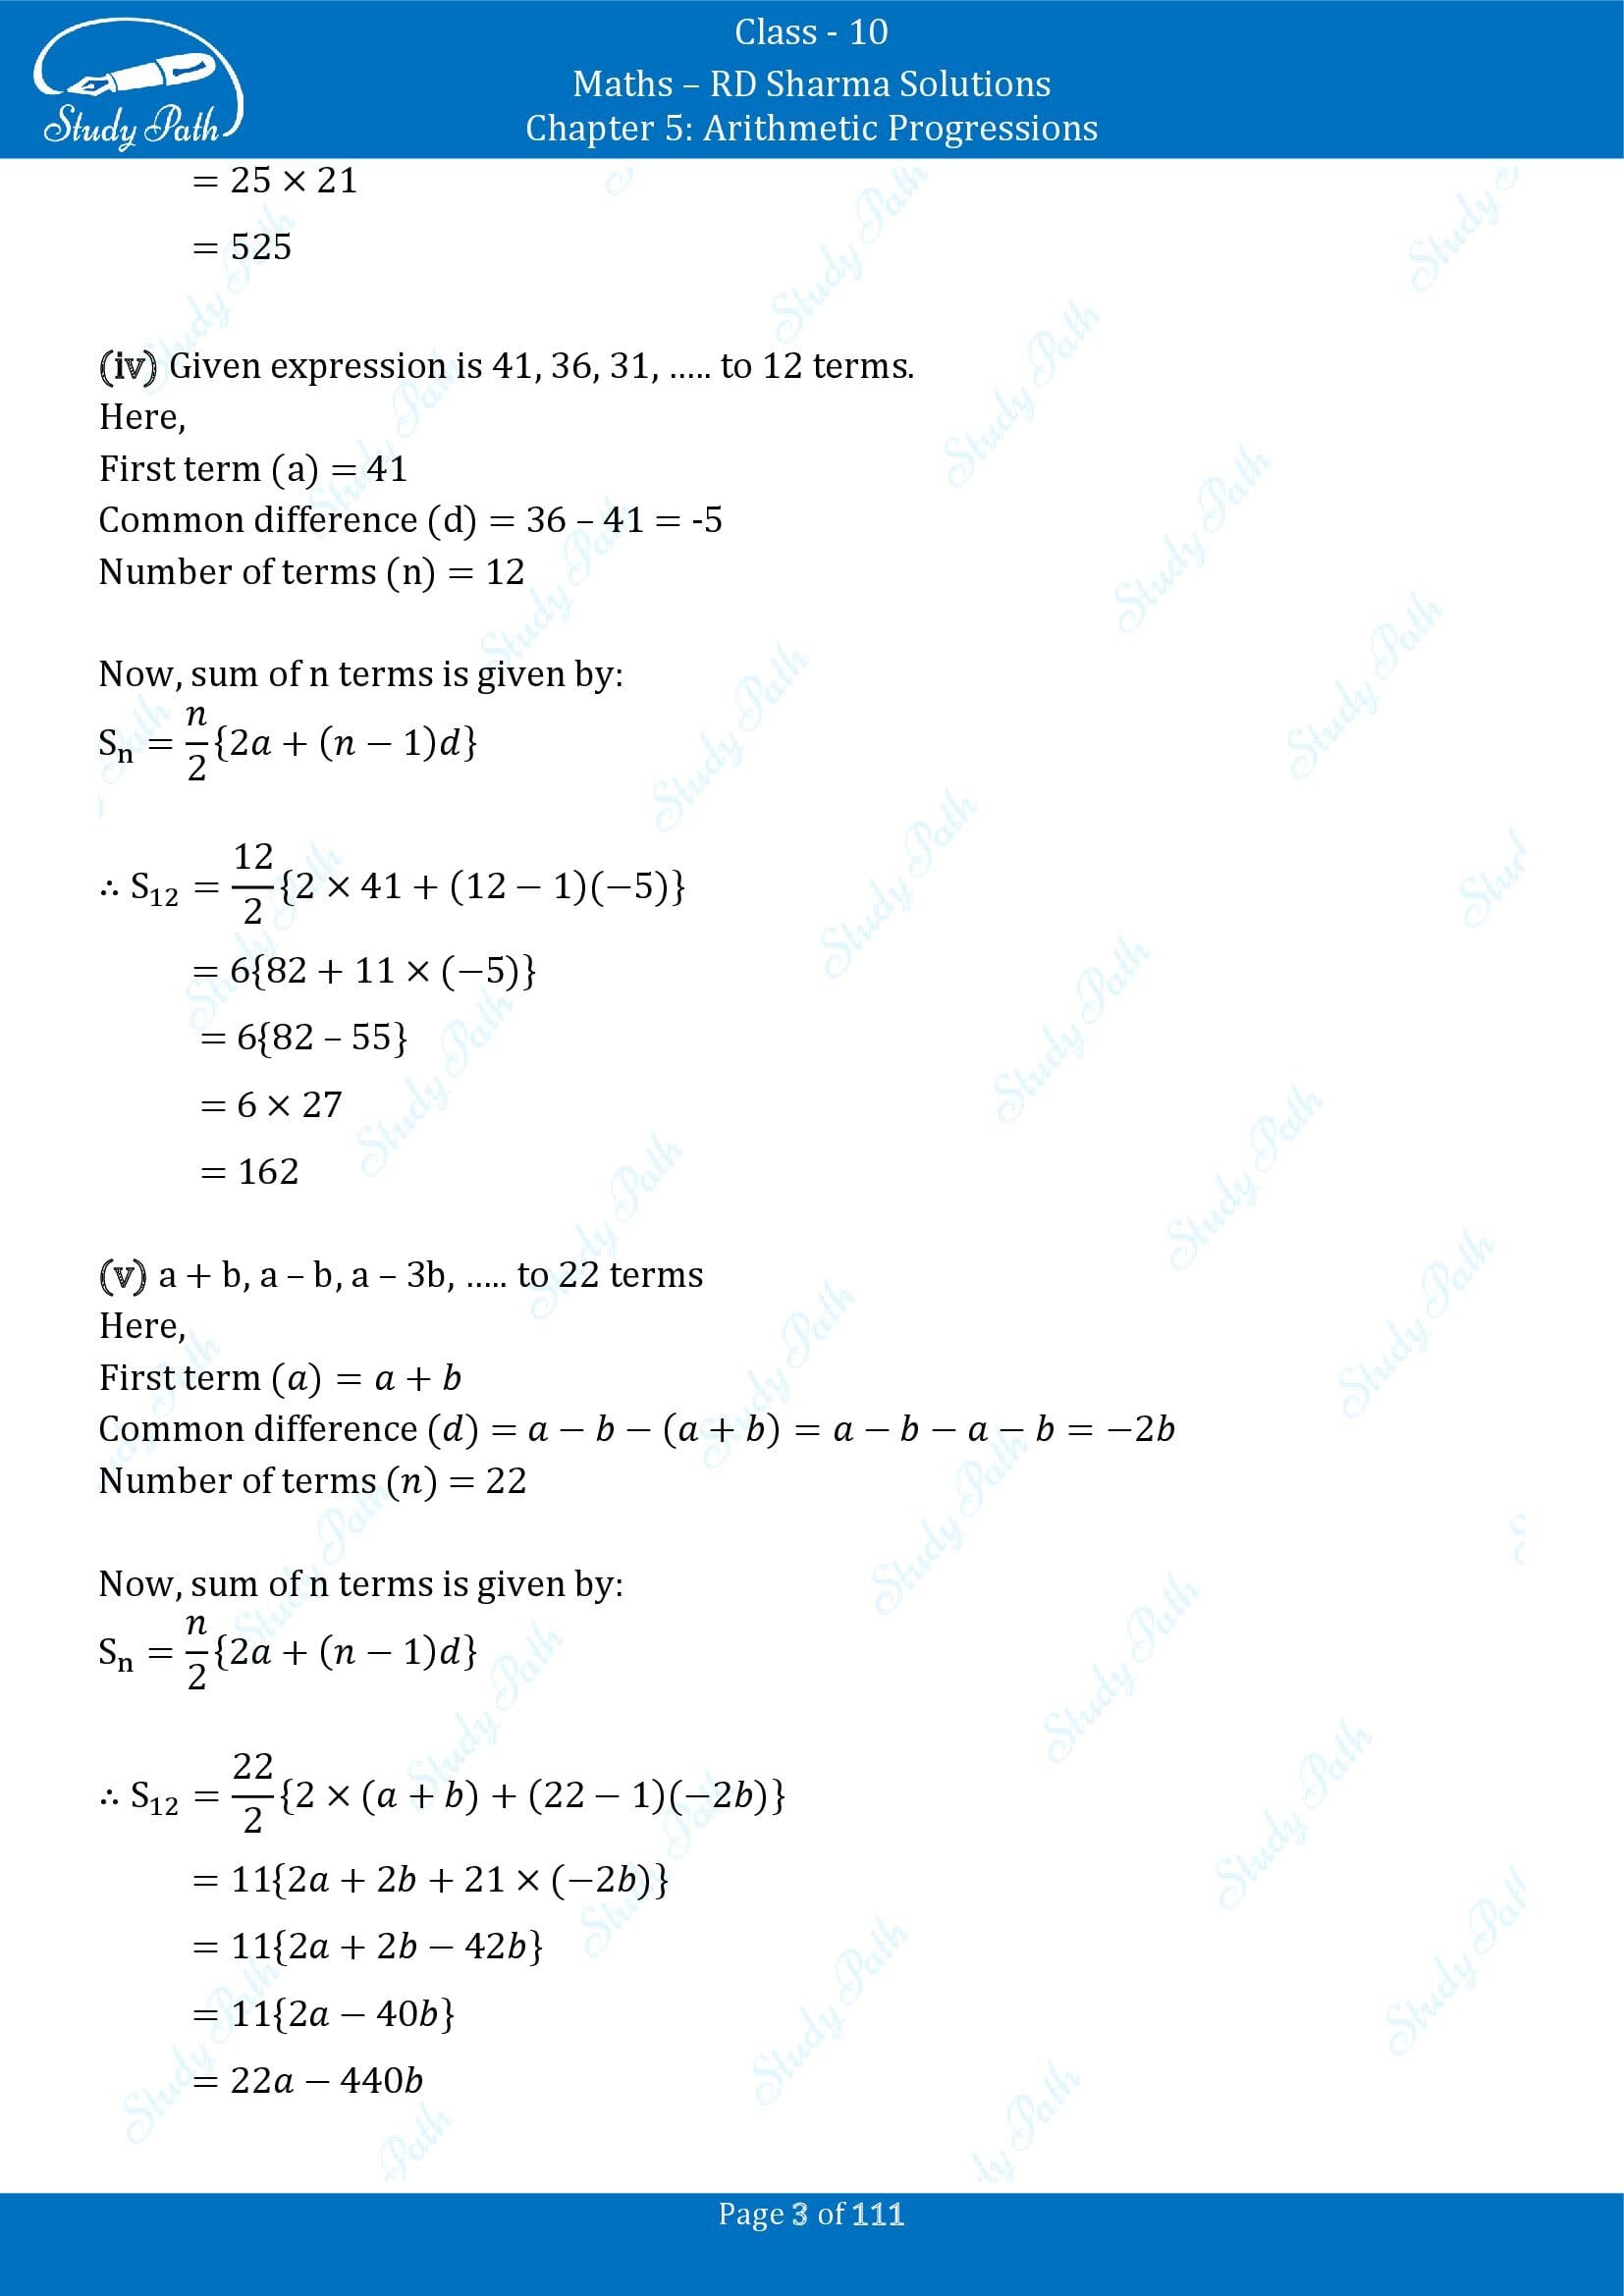 RD Sharma Solutions Class 10 Chapter 5 Arithmetic Progressions Exercise 5.6 00003